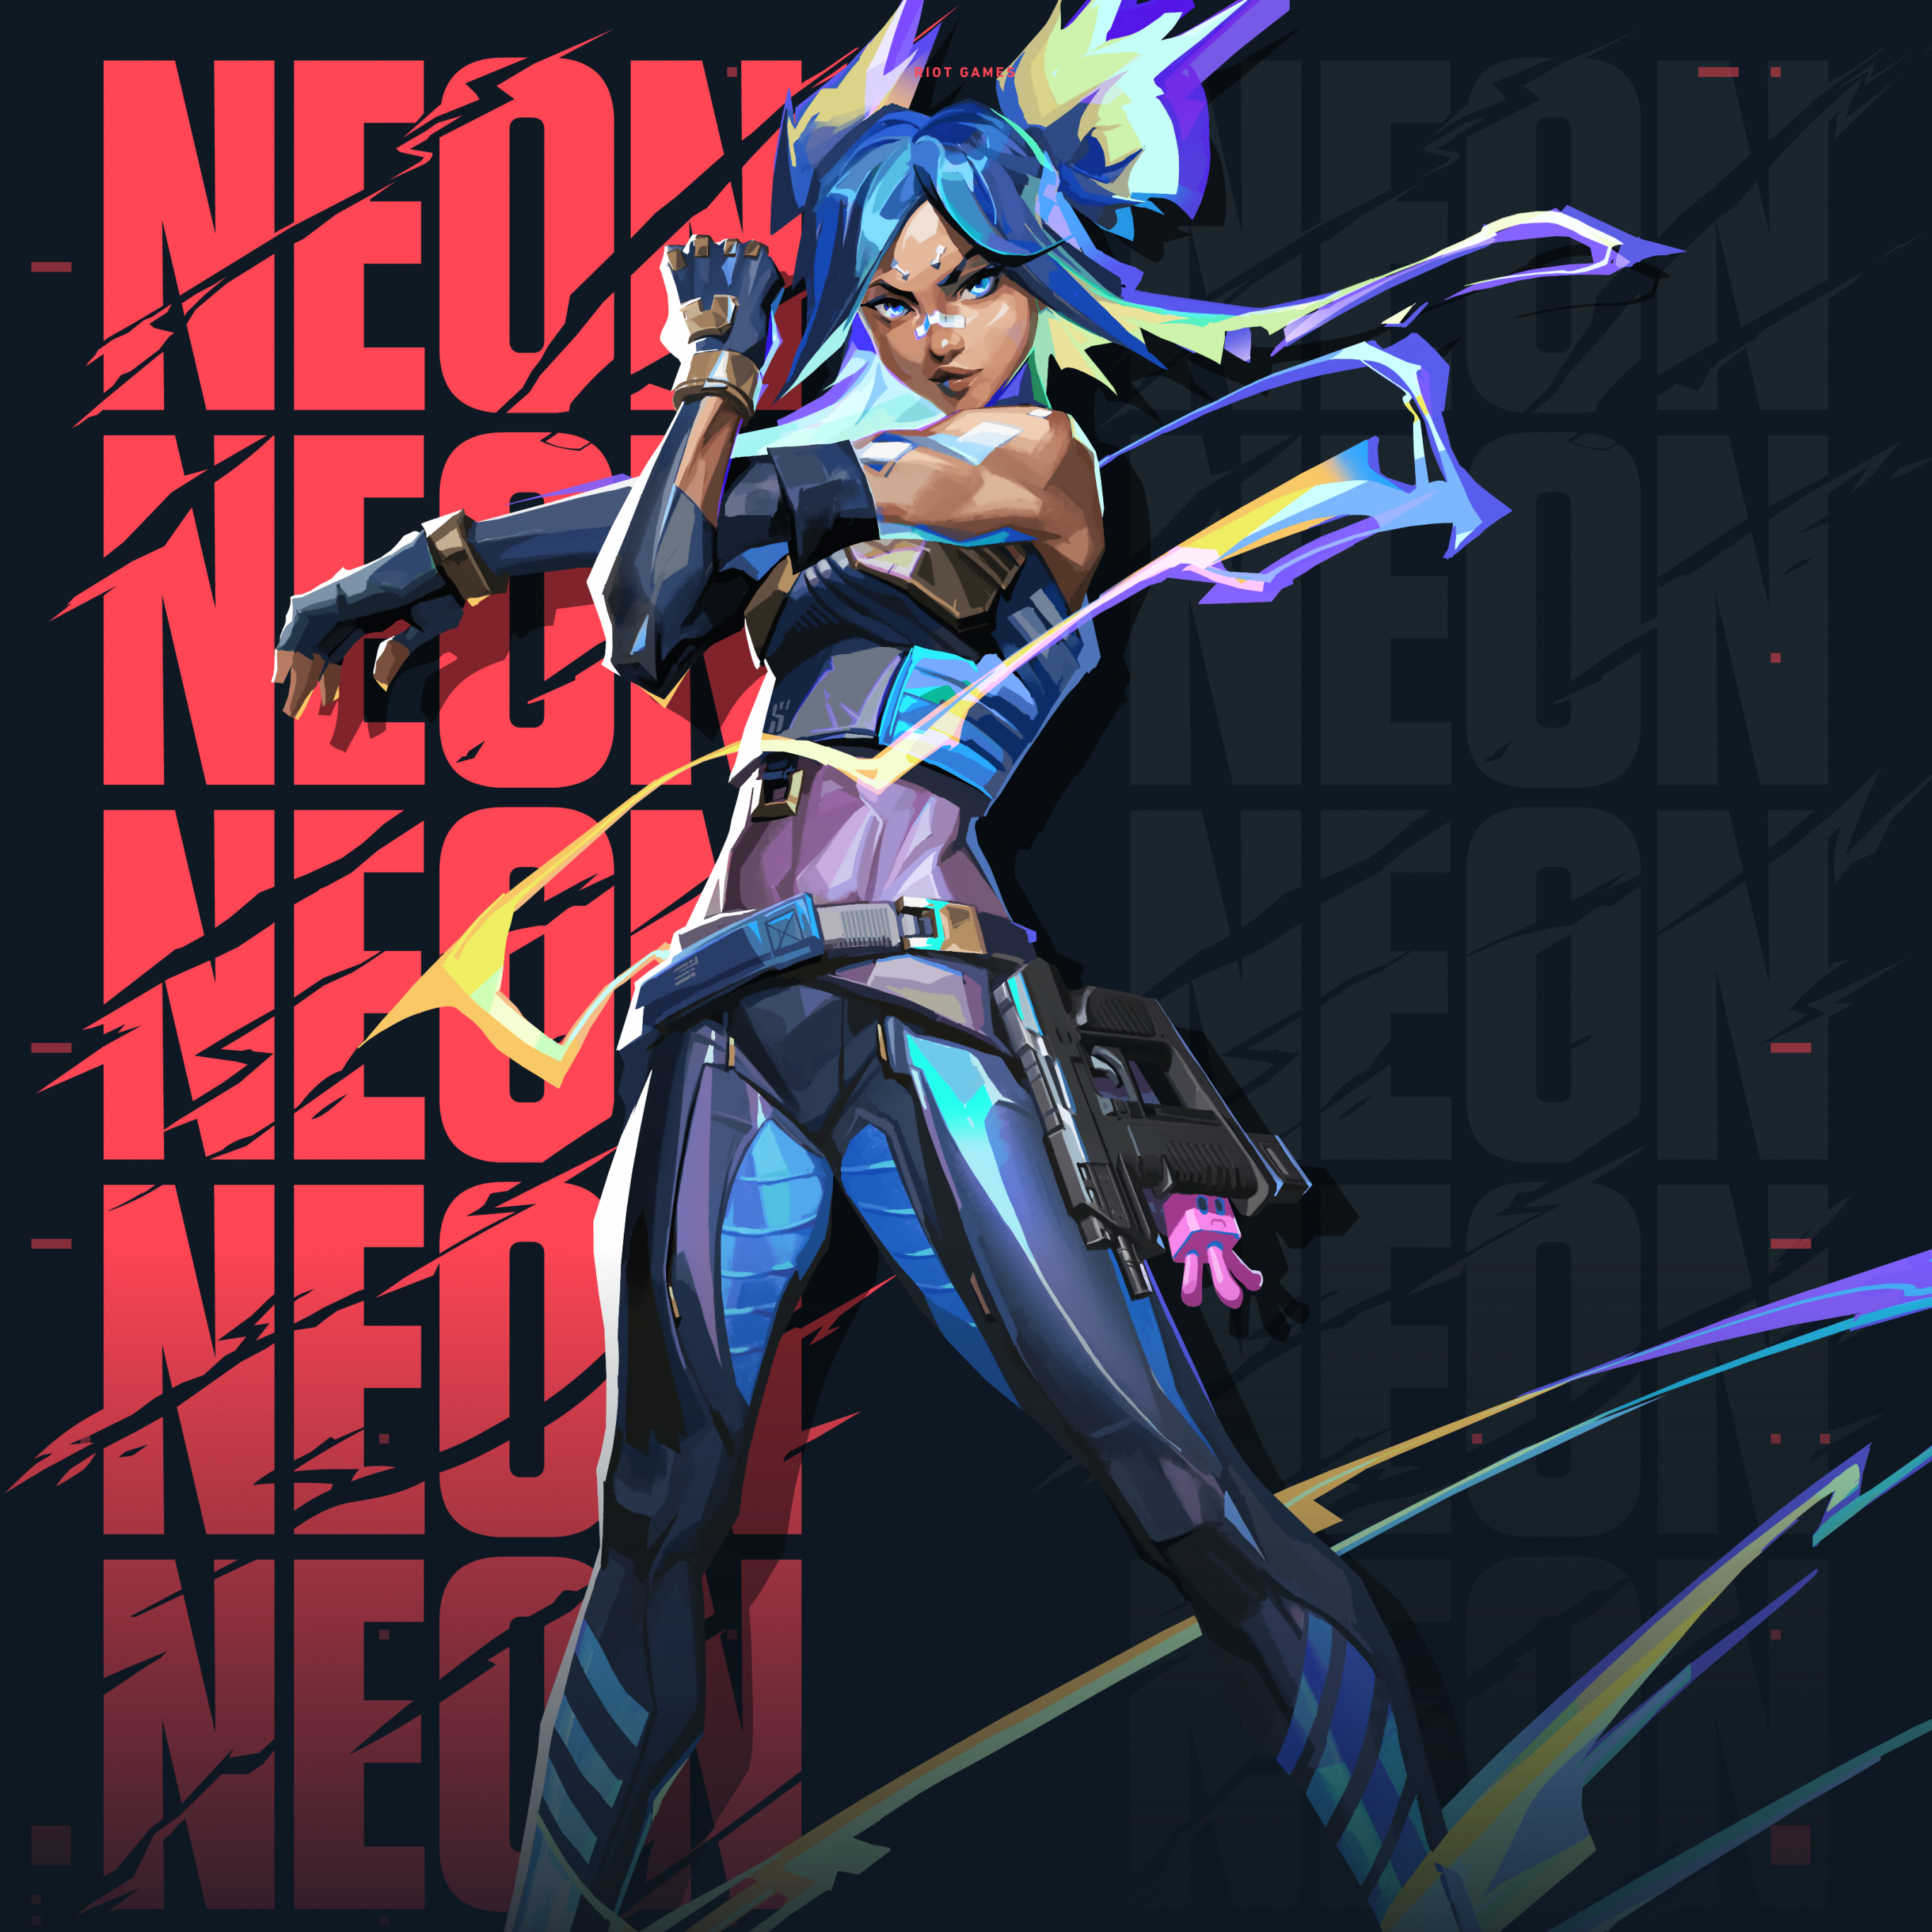 Neon Valorant 4k Wallpaper HD Games 4K Wallpapers Images and Background   Wallpapers Den